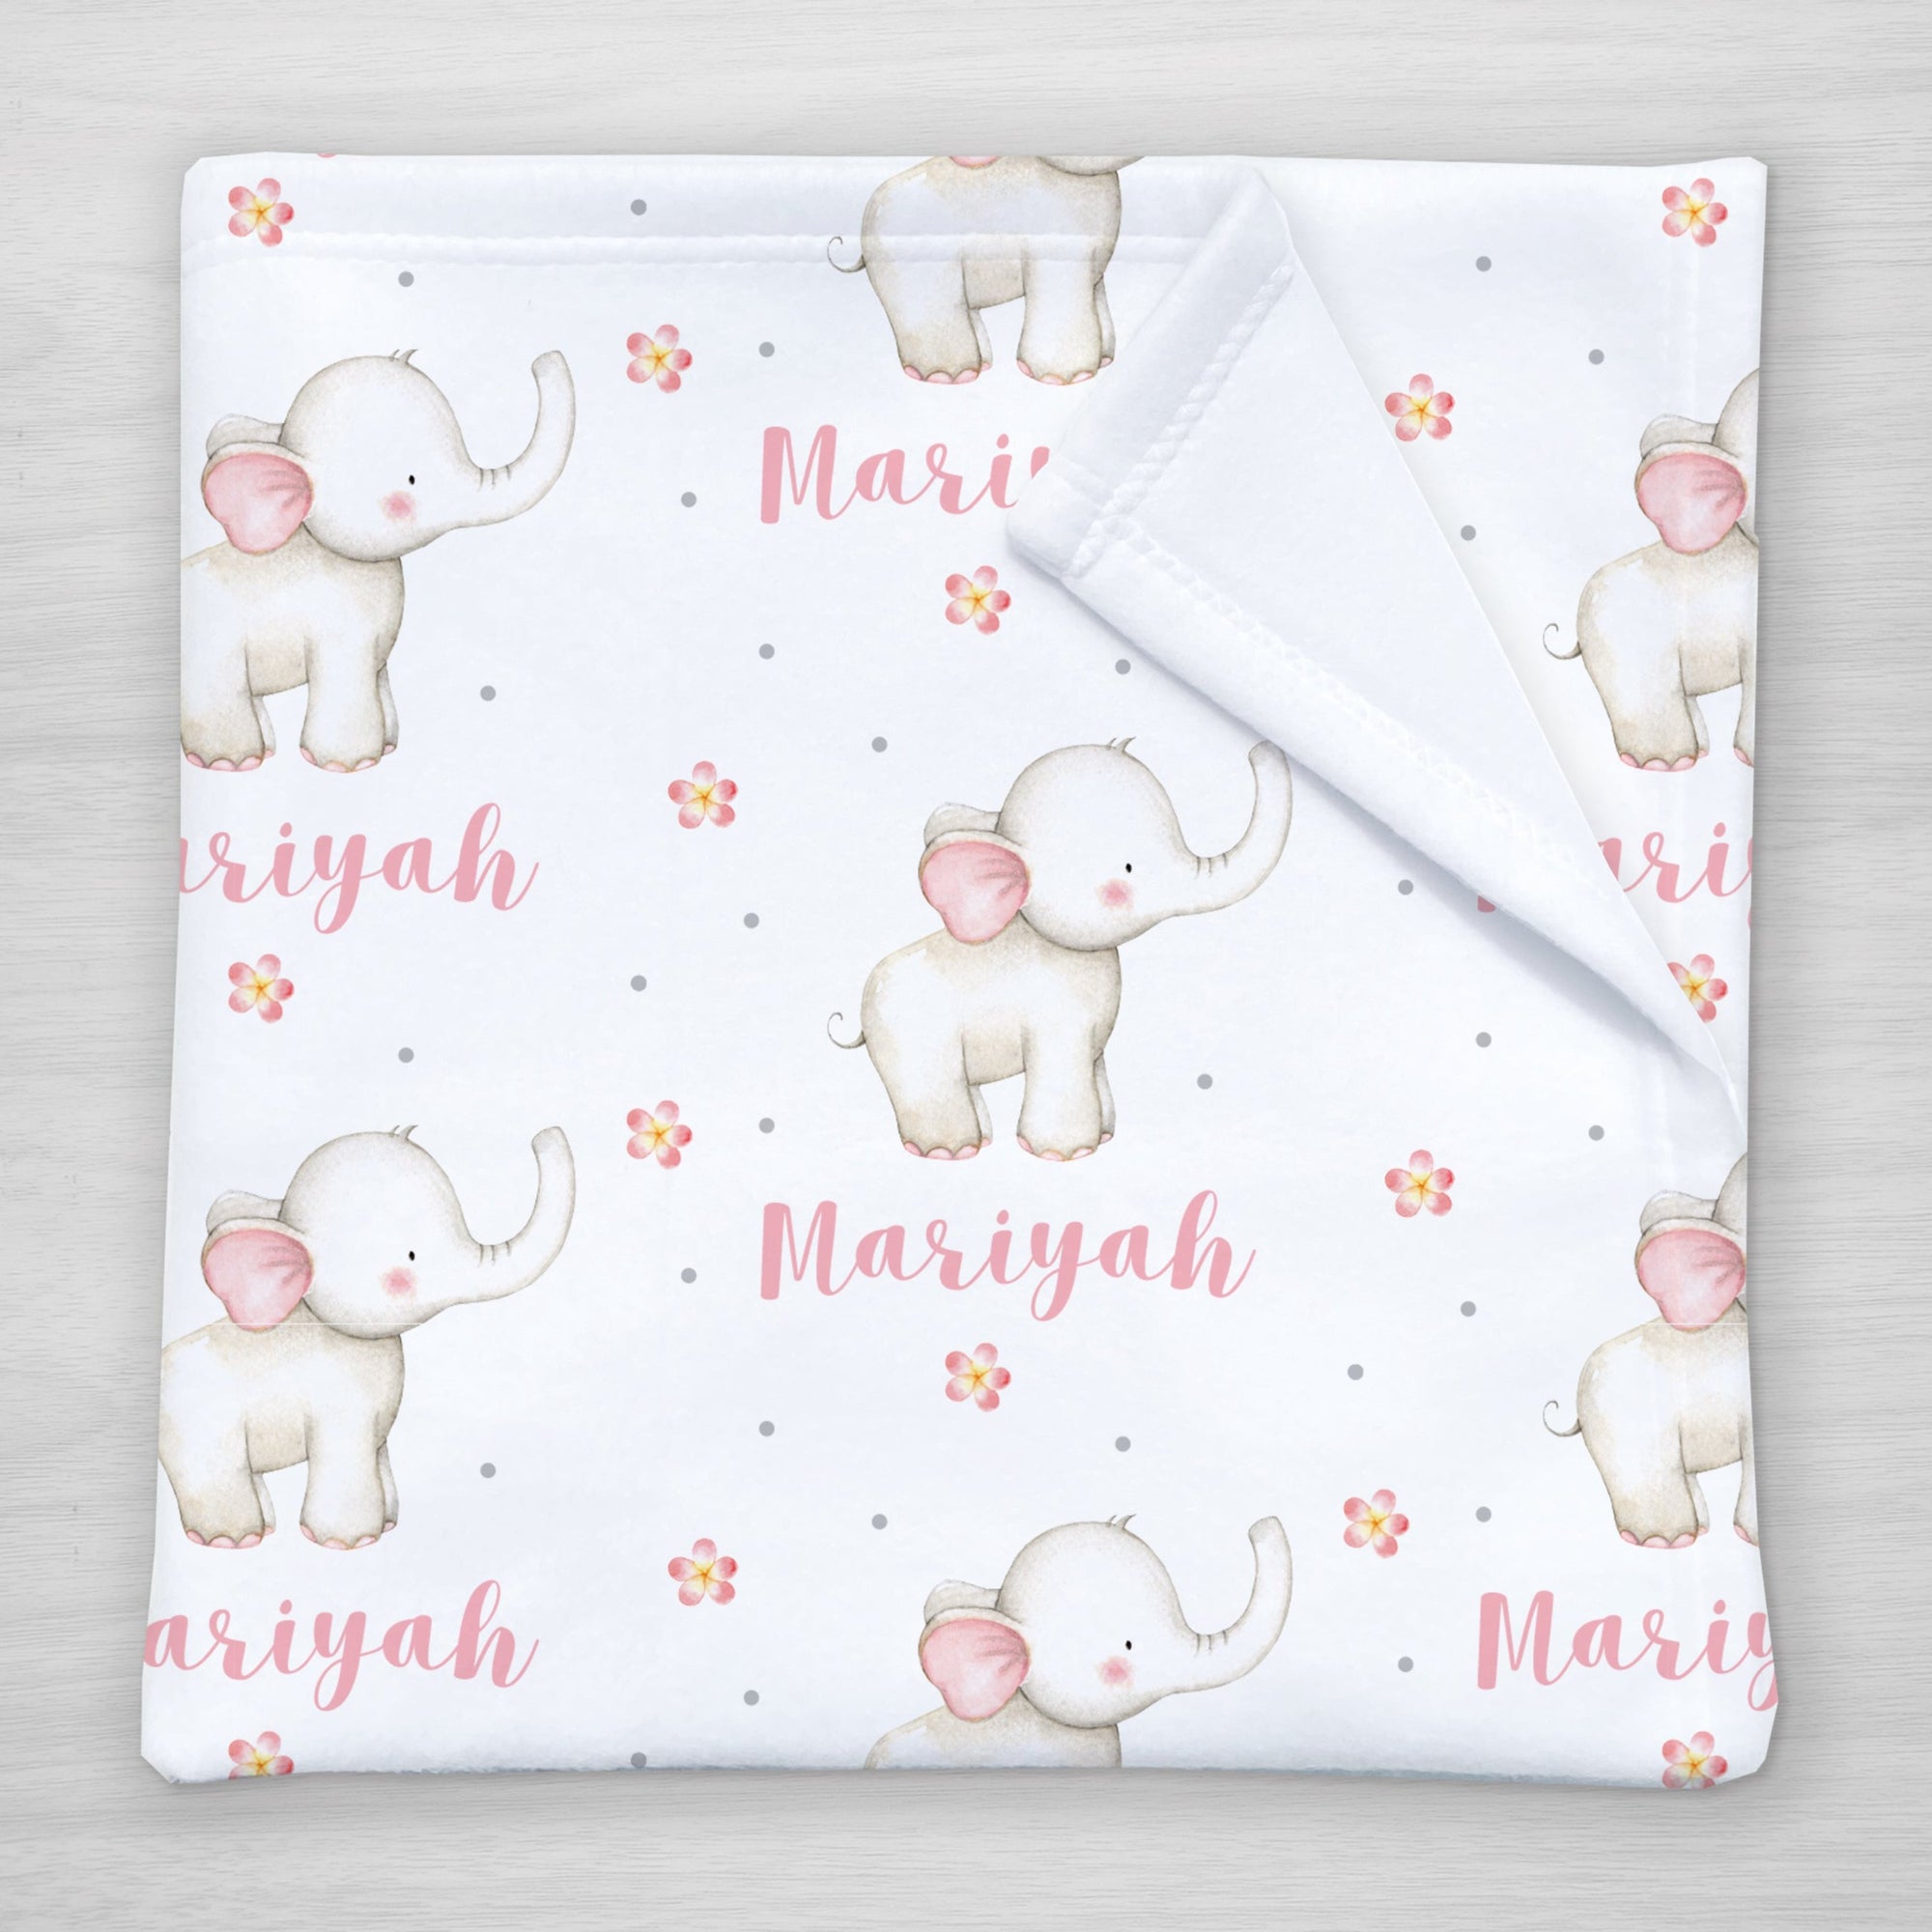 Personalized baby name blanket with elephant and flowers